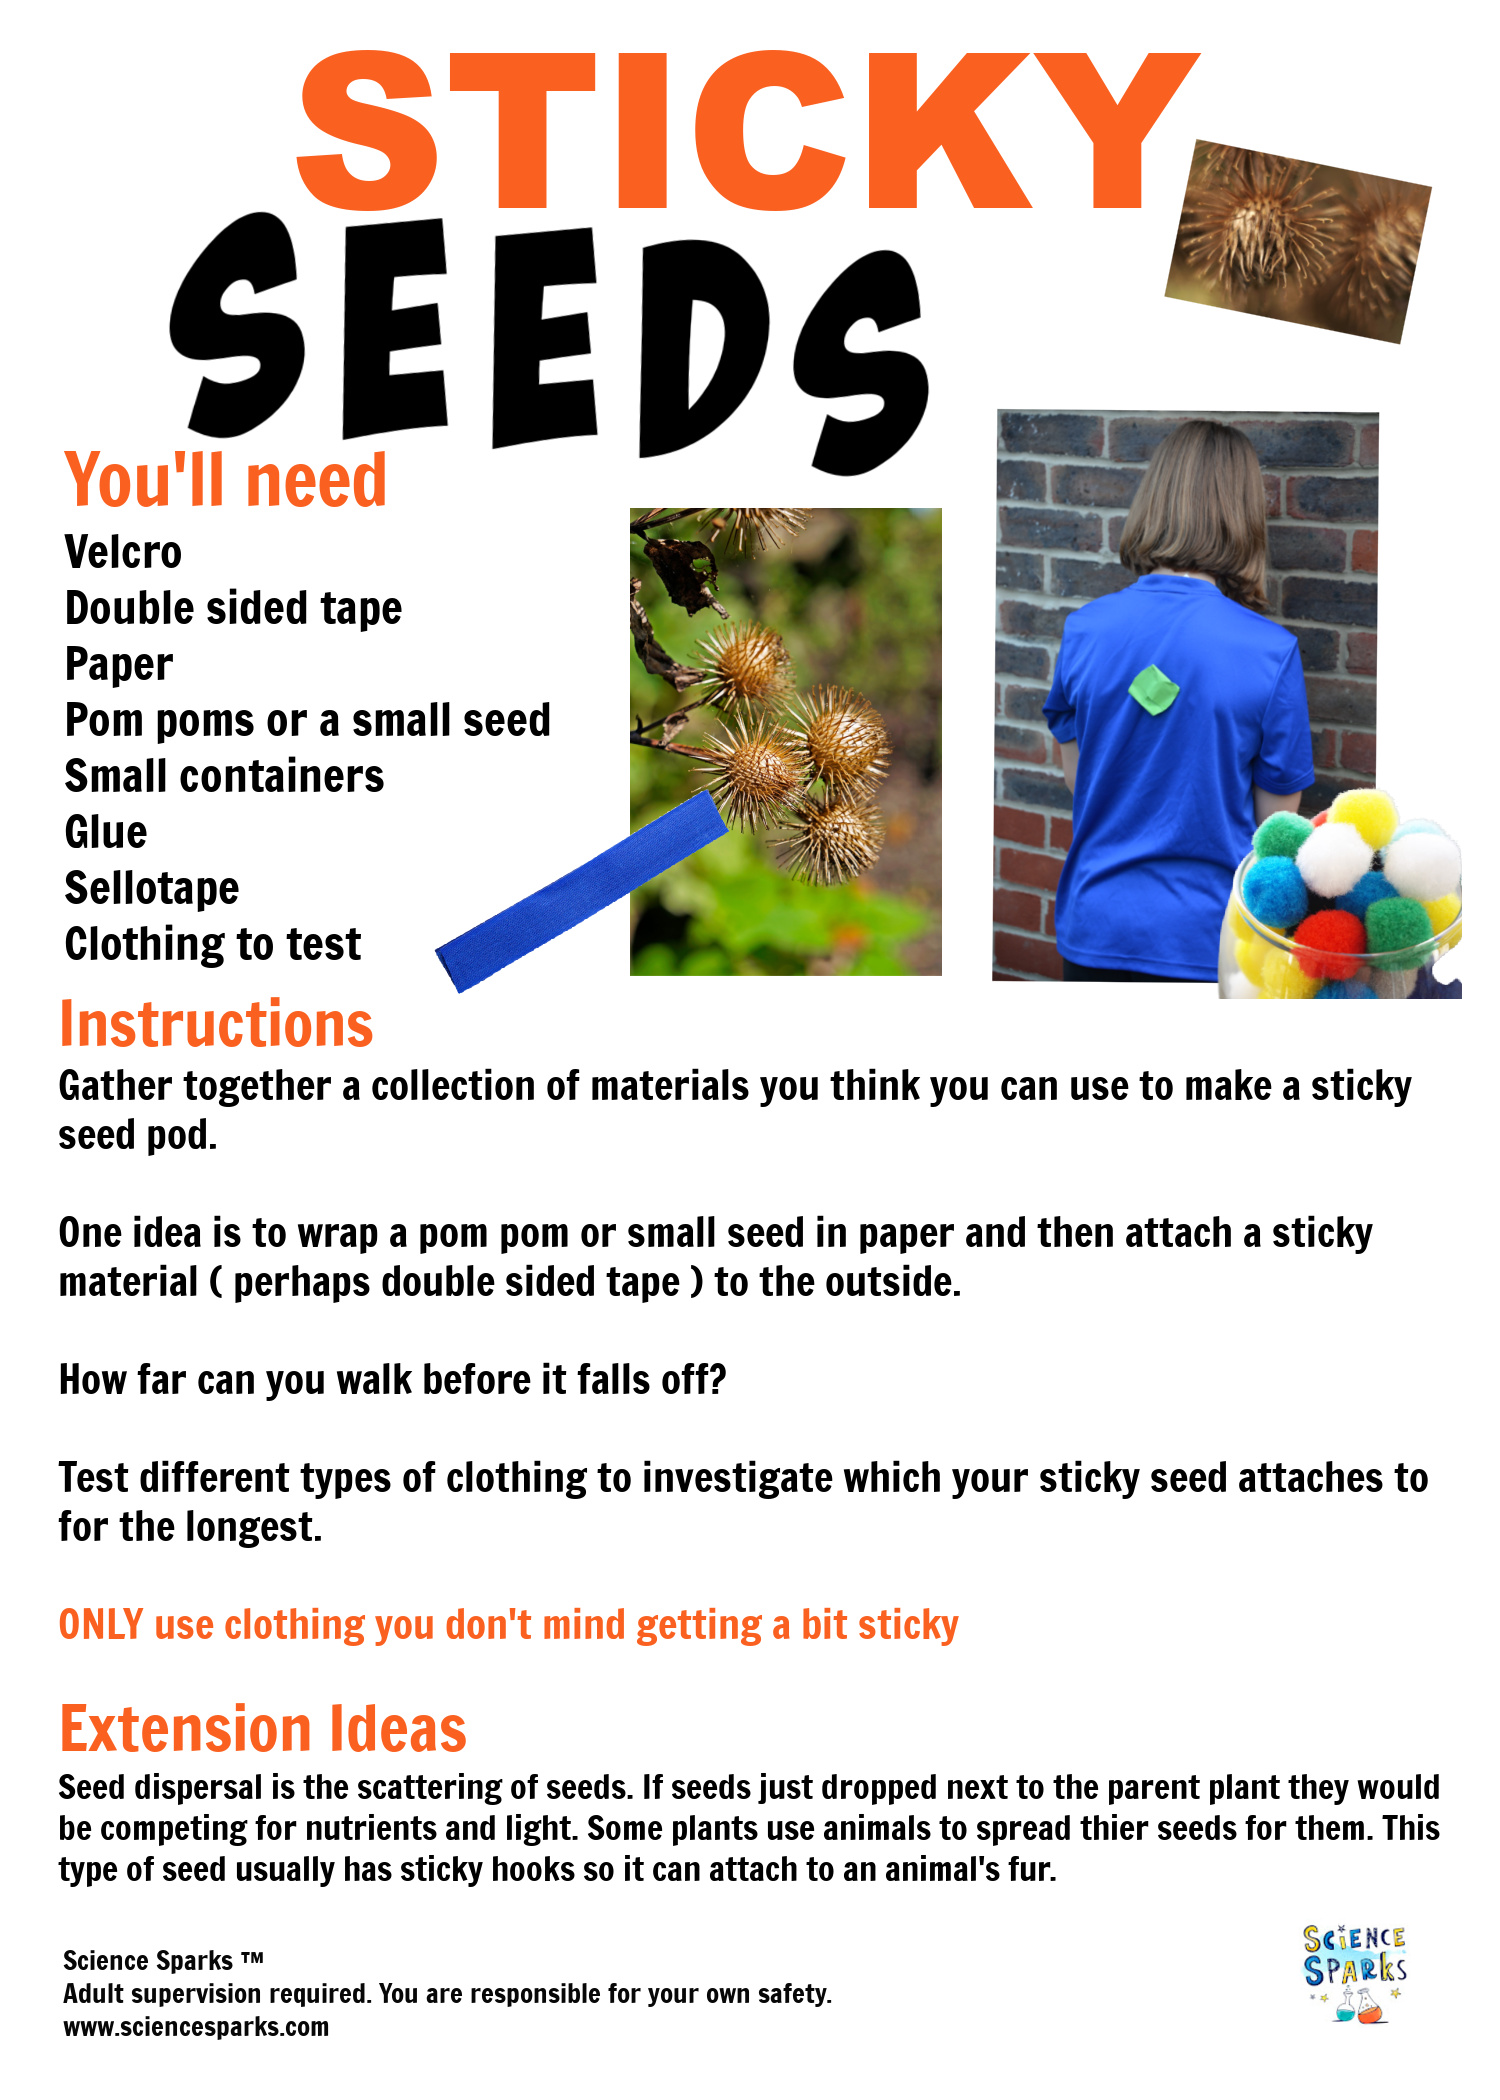 Instructions for a sticky seed pod science activity. Great for learning about seed dispersal